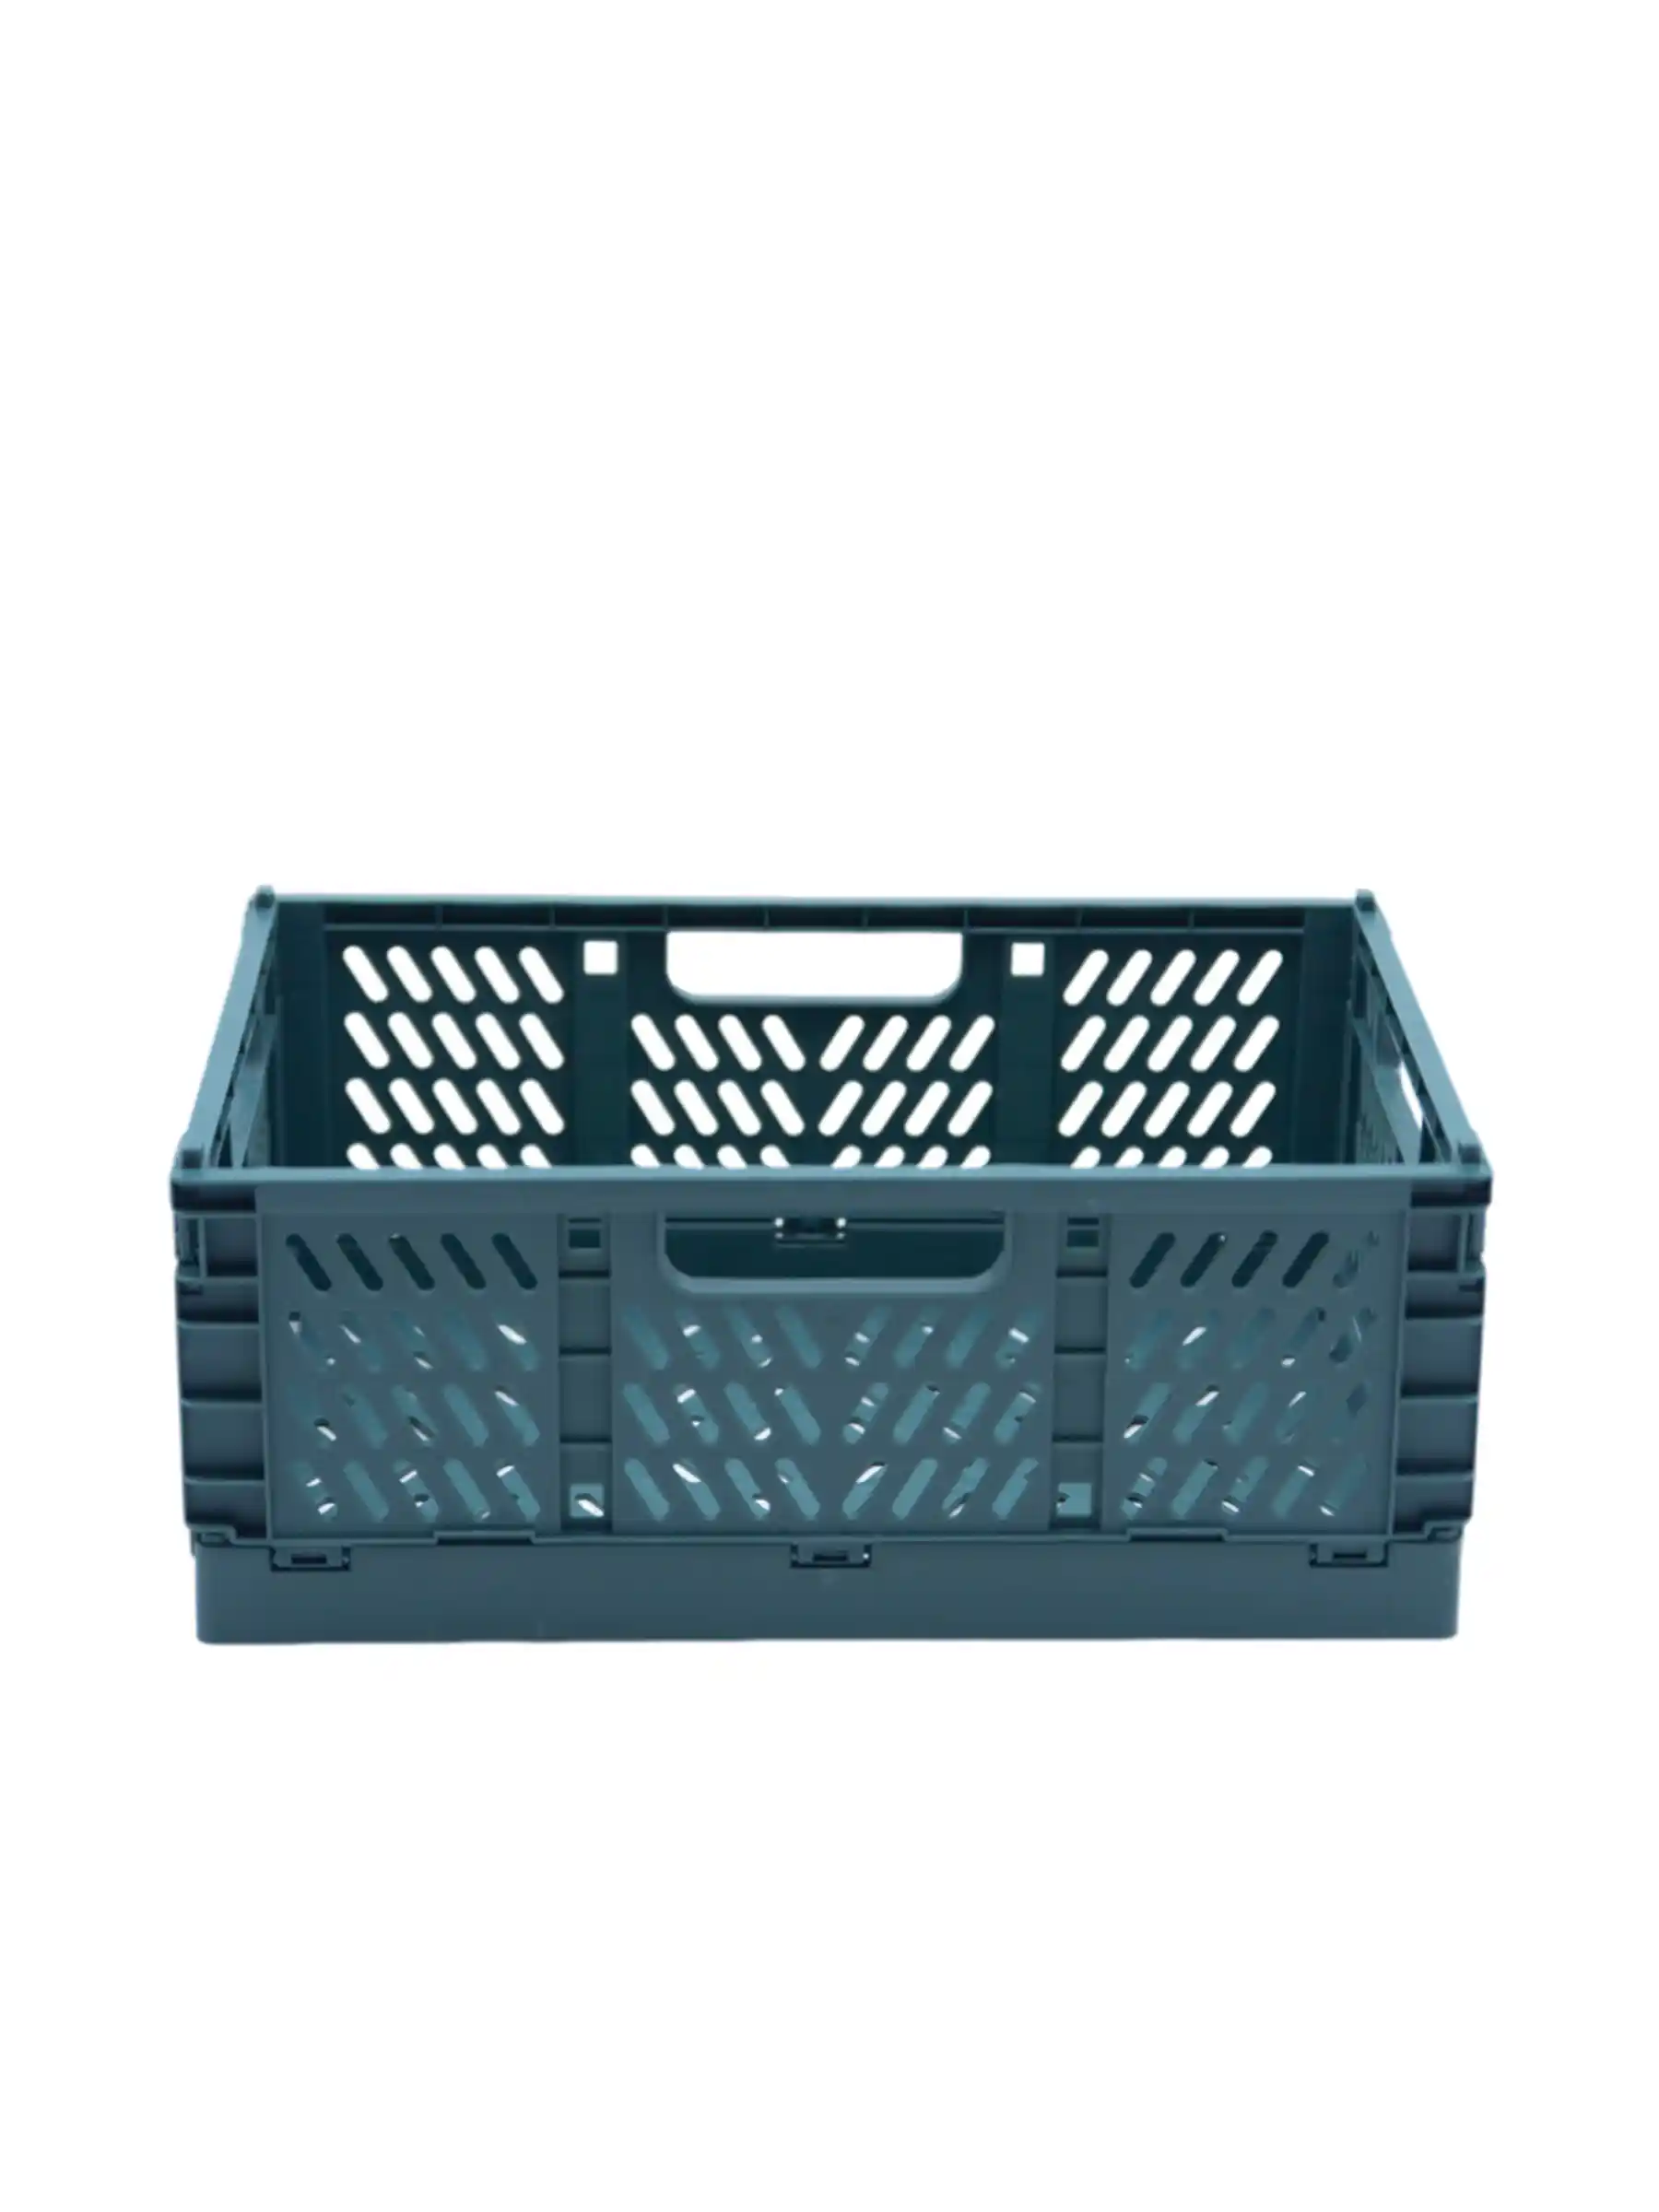 This is an expanded green large plastic foldable organization basket